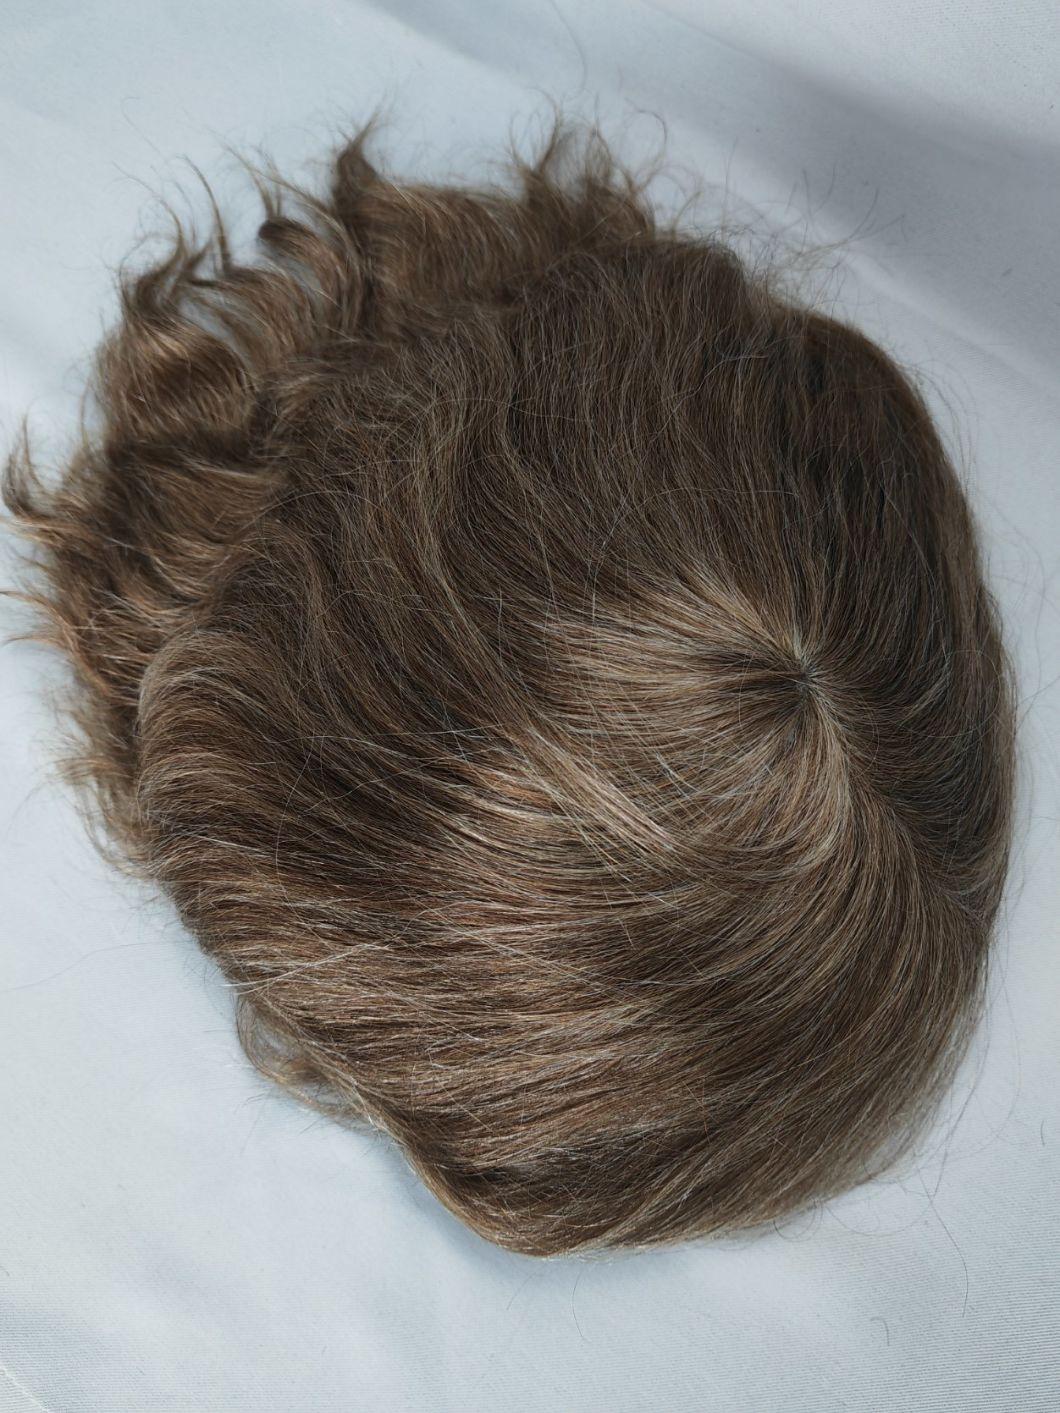 2022 Best Comfortable Custom Made Clear PU Base Injection Toupee Made of Remy Human Hair